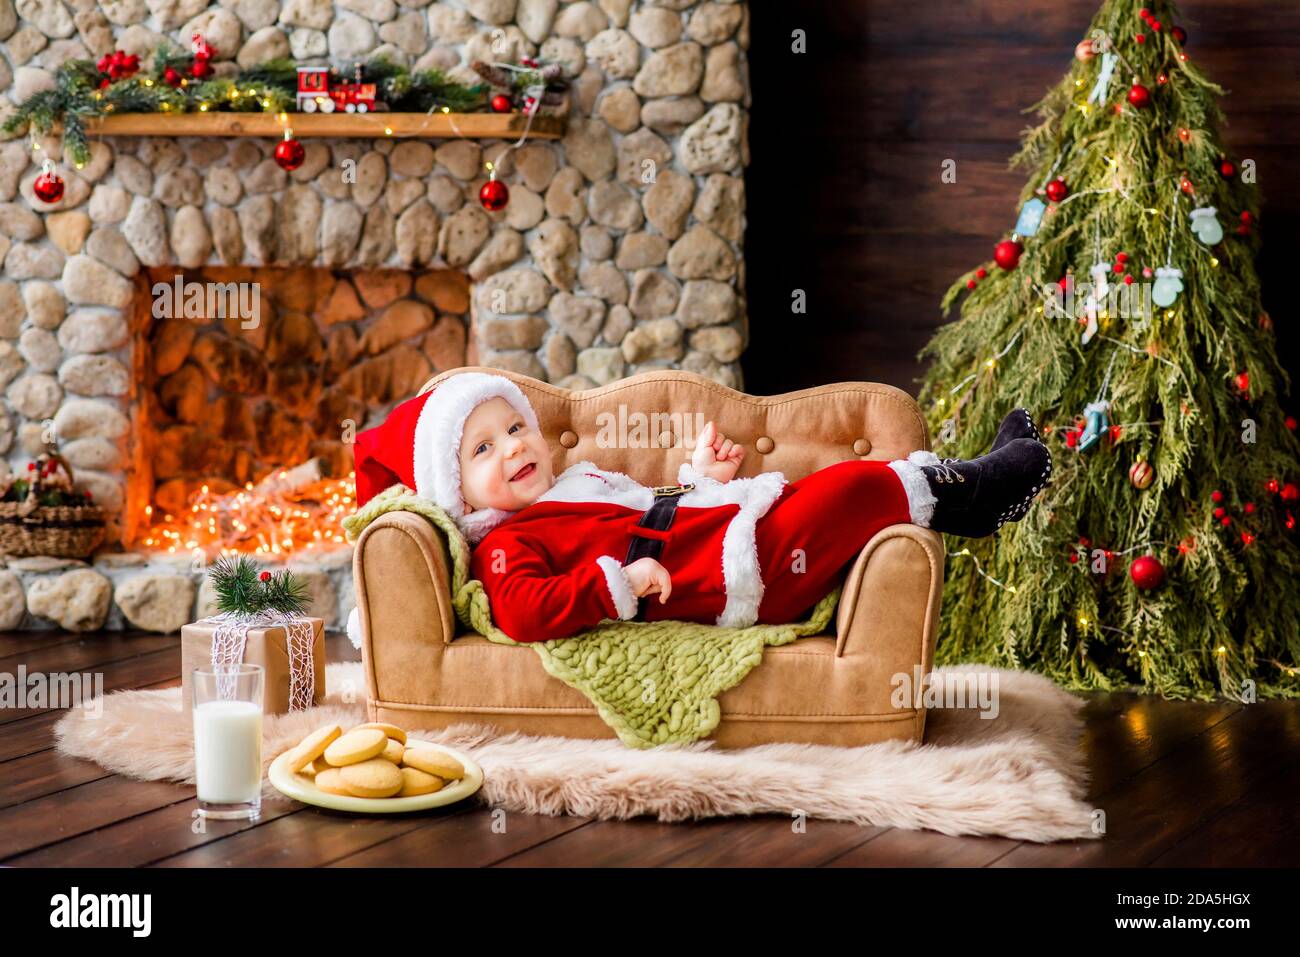 Close-up portrait of a Little boy dressed as red Santa Claus, playing by stone fireplace with bright garlands, putting a gift box under Christmas tree Stock Photo